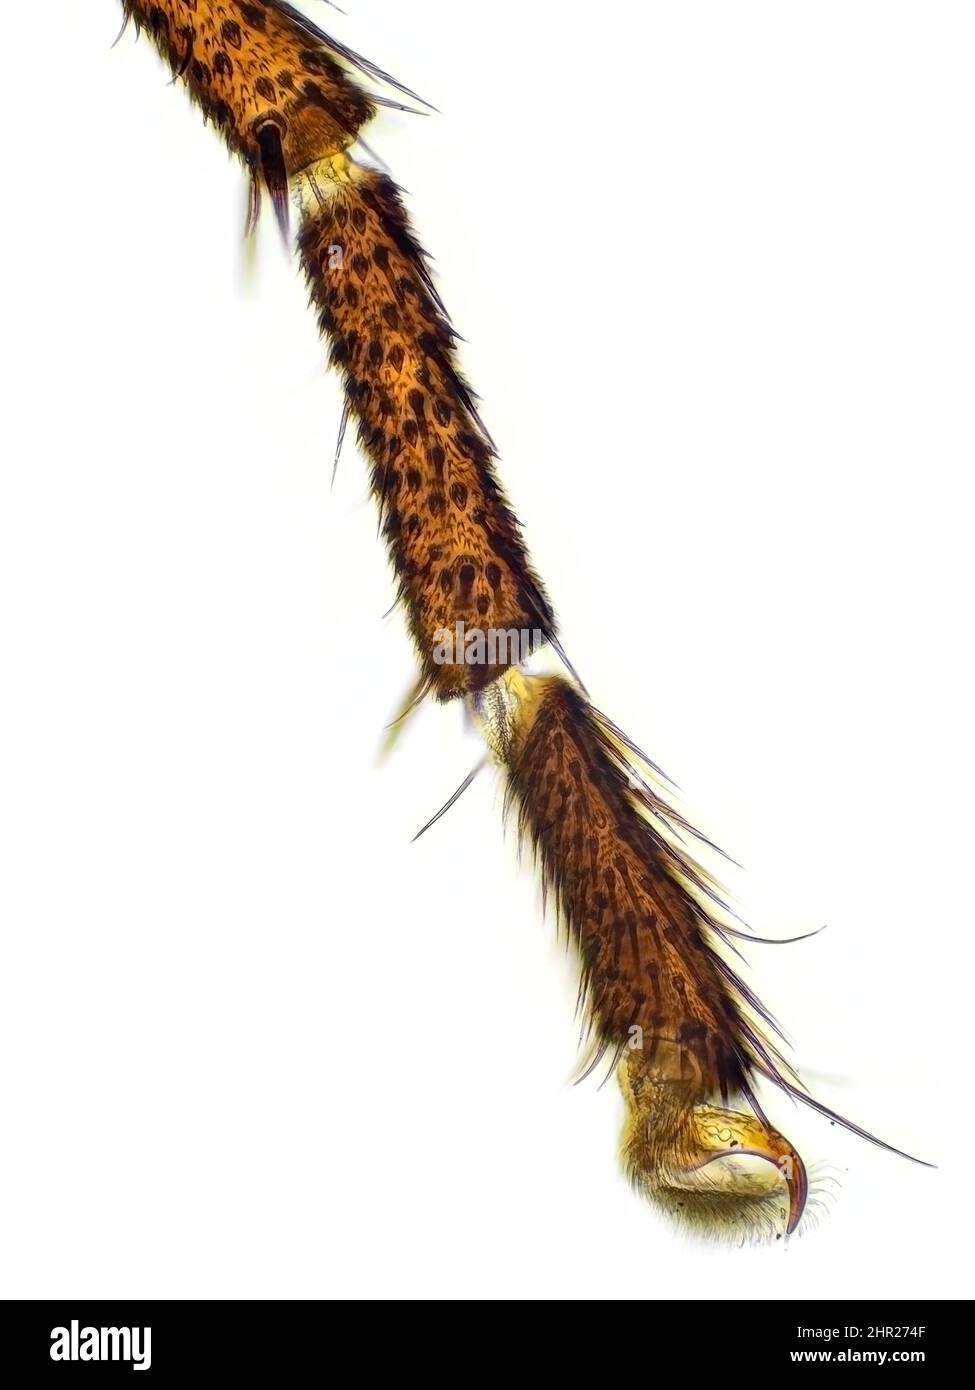 Mosquito leg under the microscope, vertical field of view is about 0.6mm Stock Photo